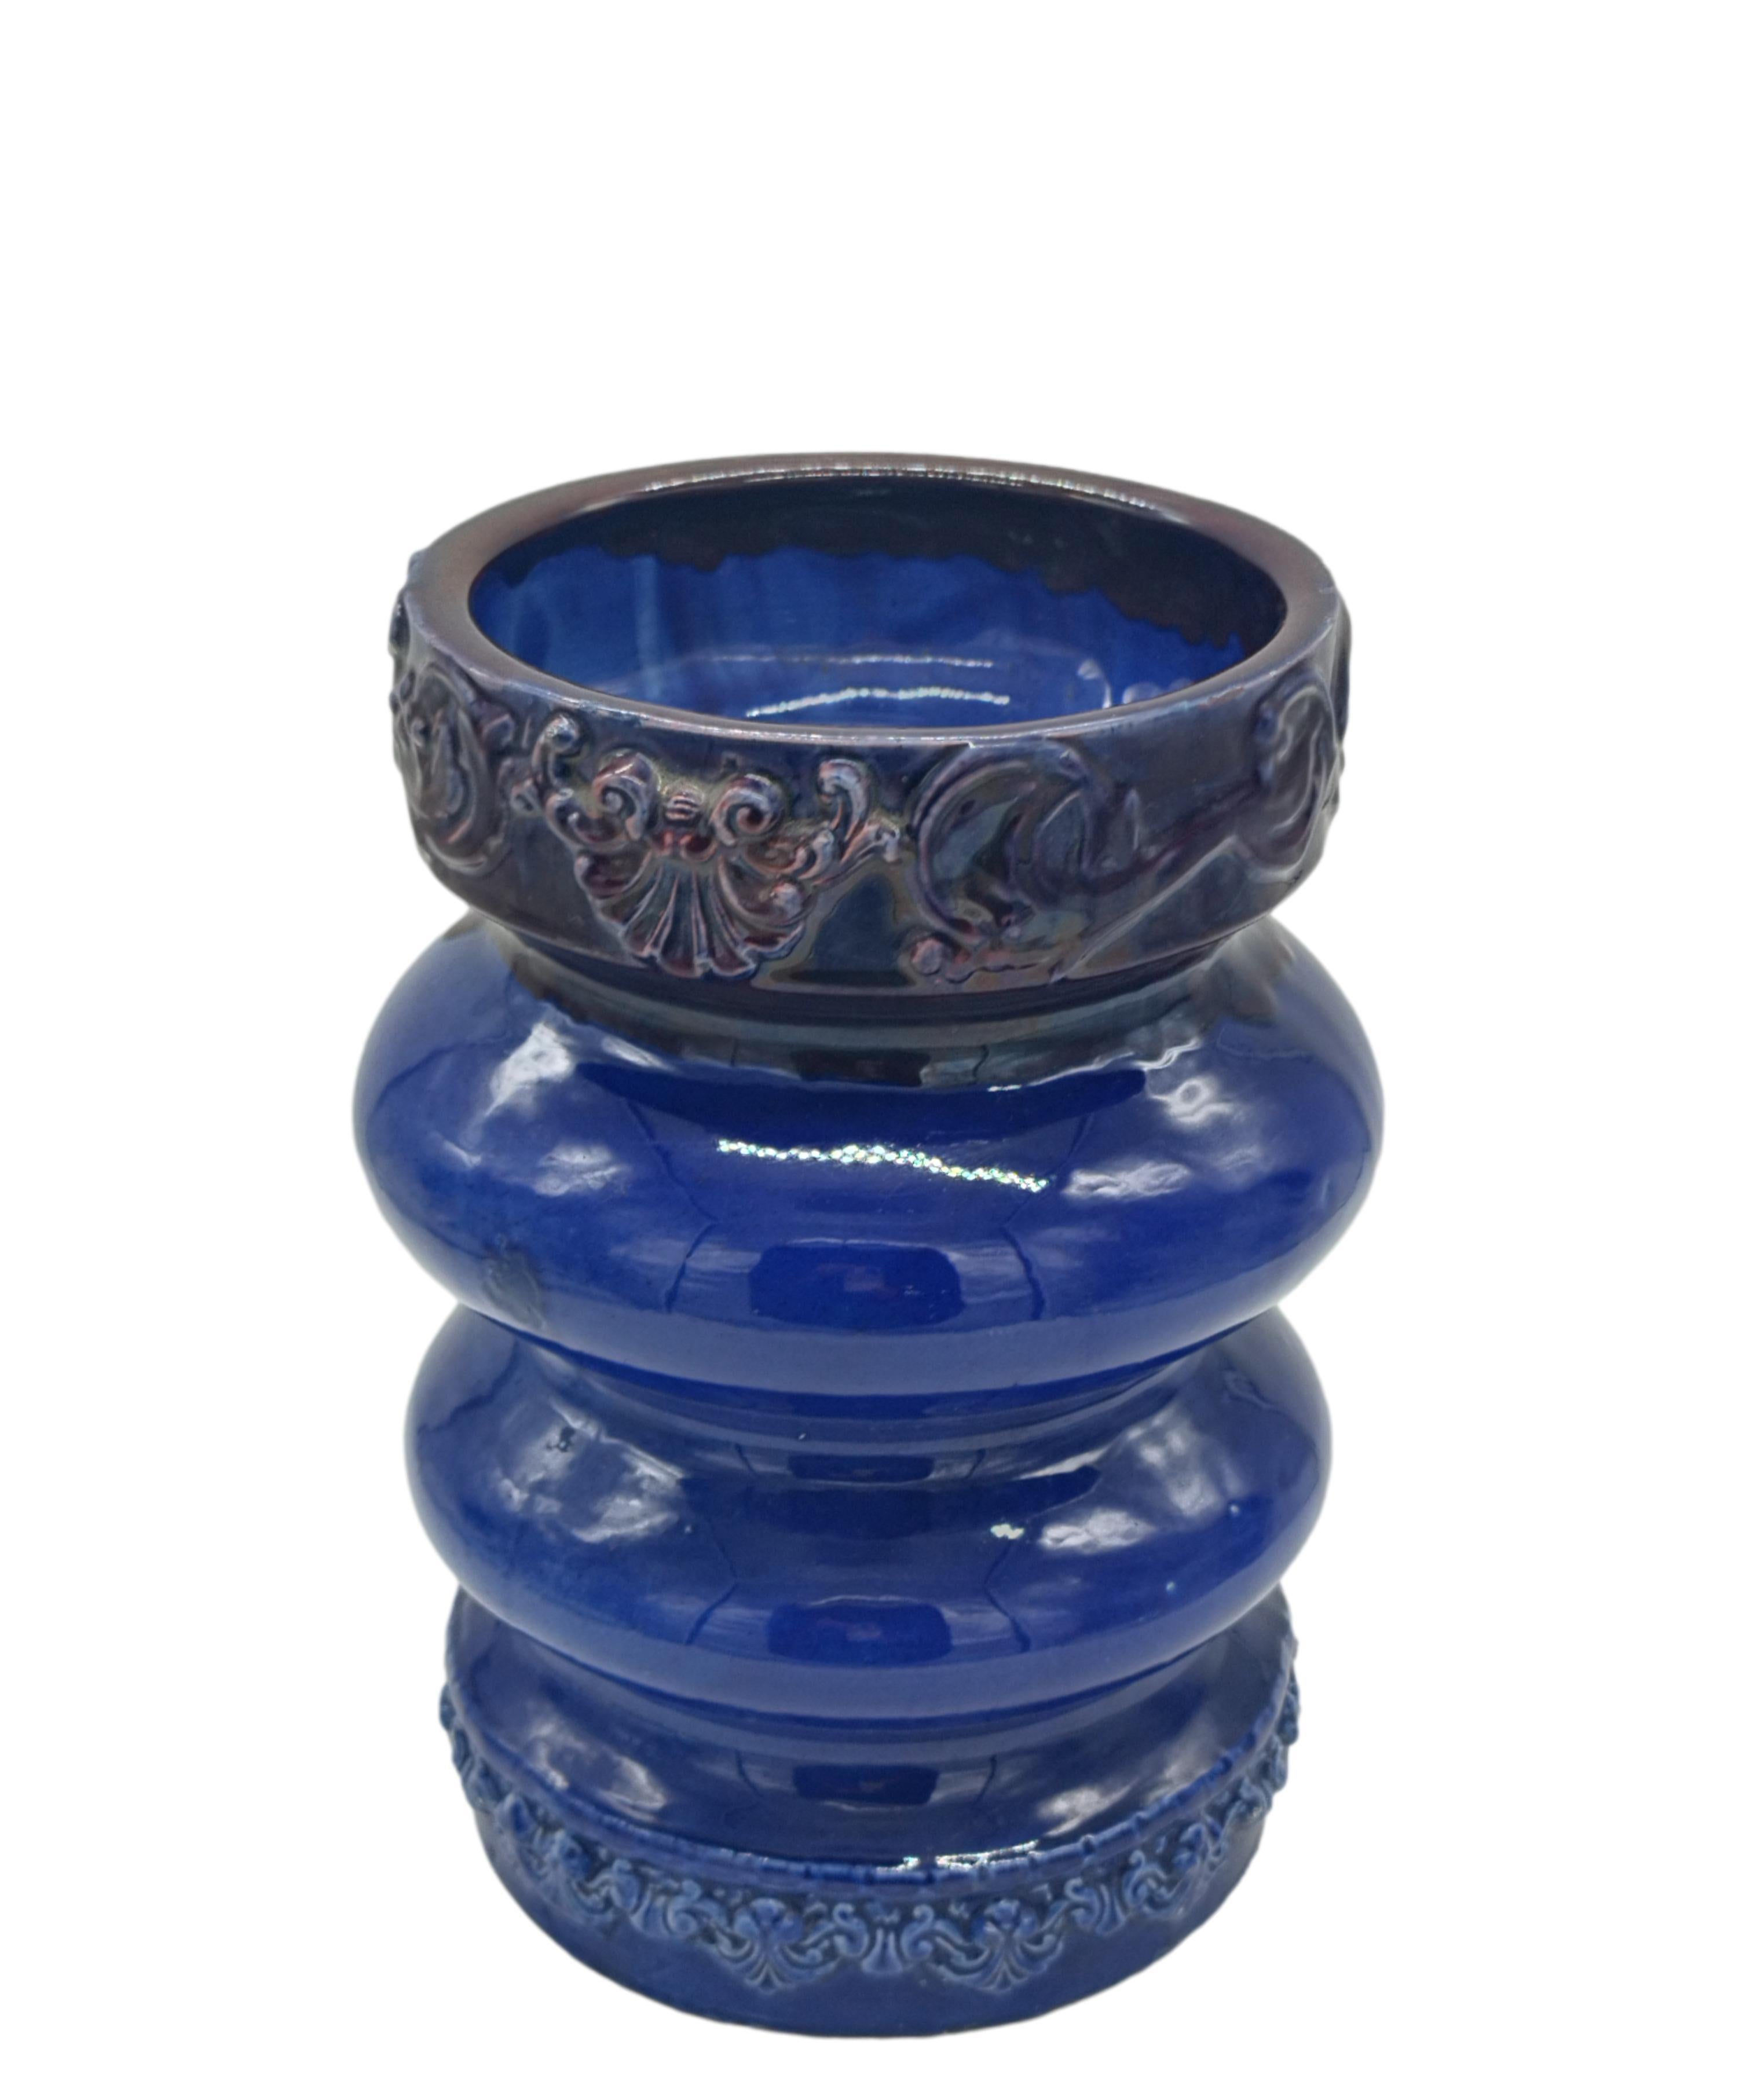 Handmade in ceramic on a potter's wheel using traditional techniques, this vase is skilfully glazed in several layers using various shades of blue to achieve this powerful shade of cobalt blue. Due to its handcrafted nature, this piece is absolutely